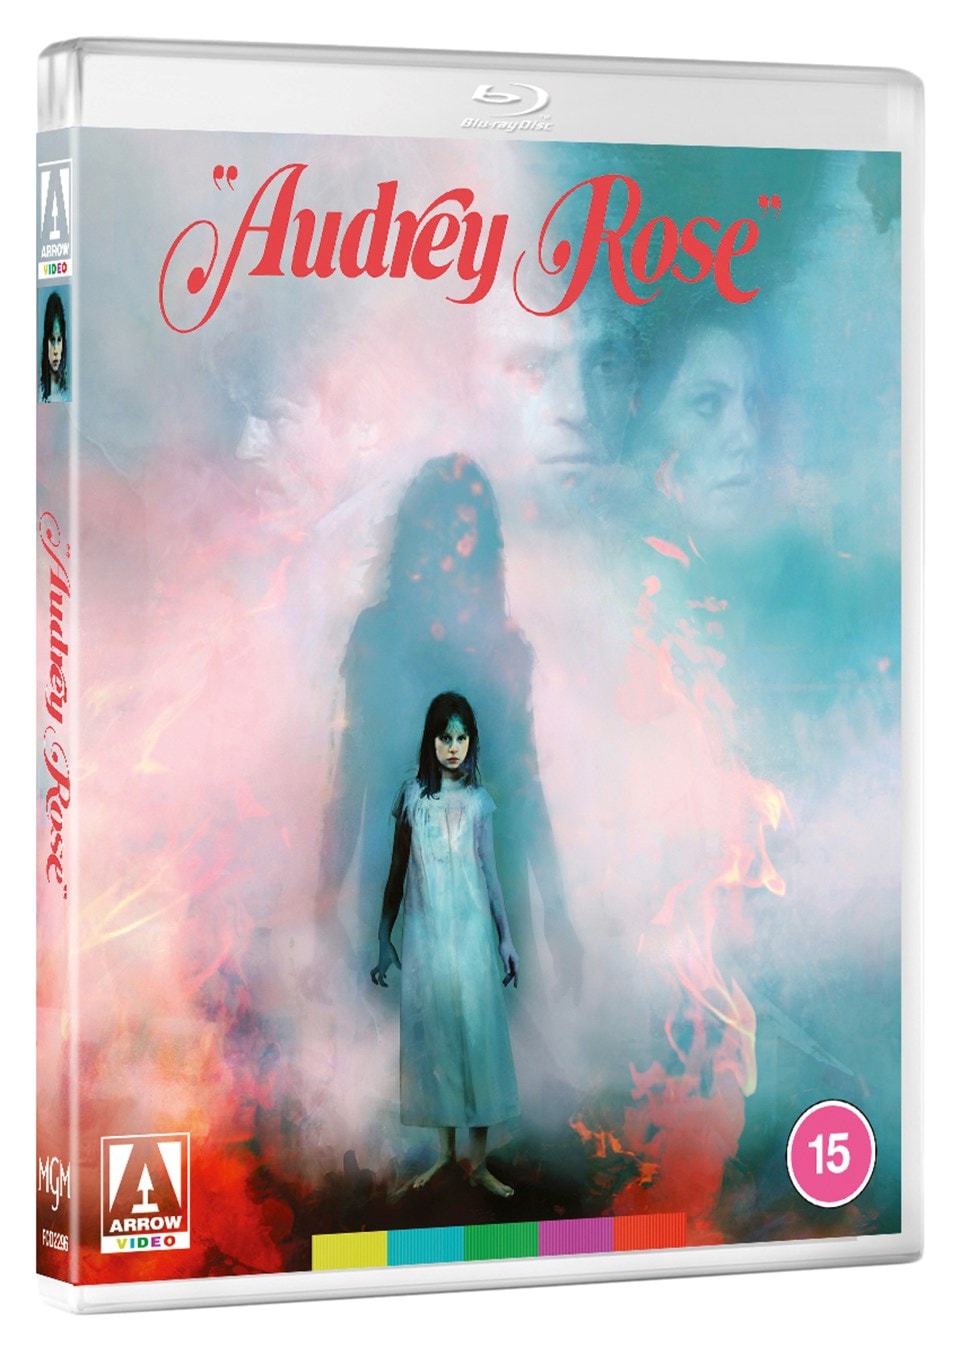 Audrey Rose Blu Ray Free Shipping Over 20 Hmv Store